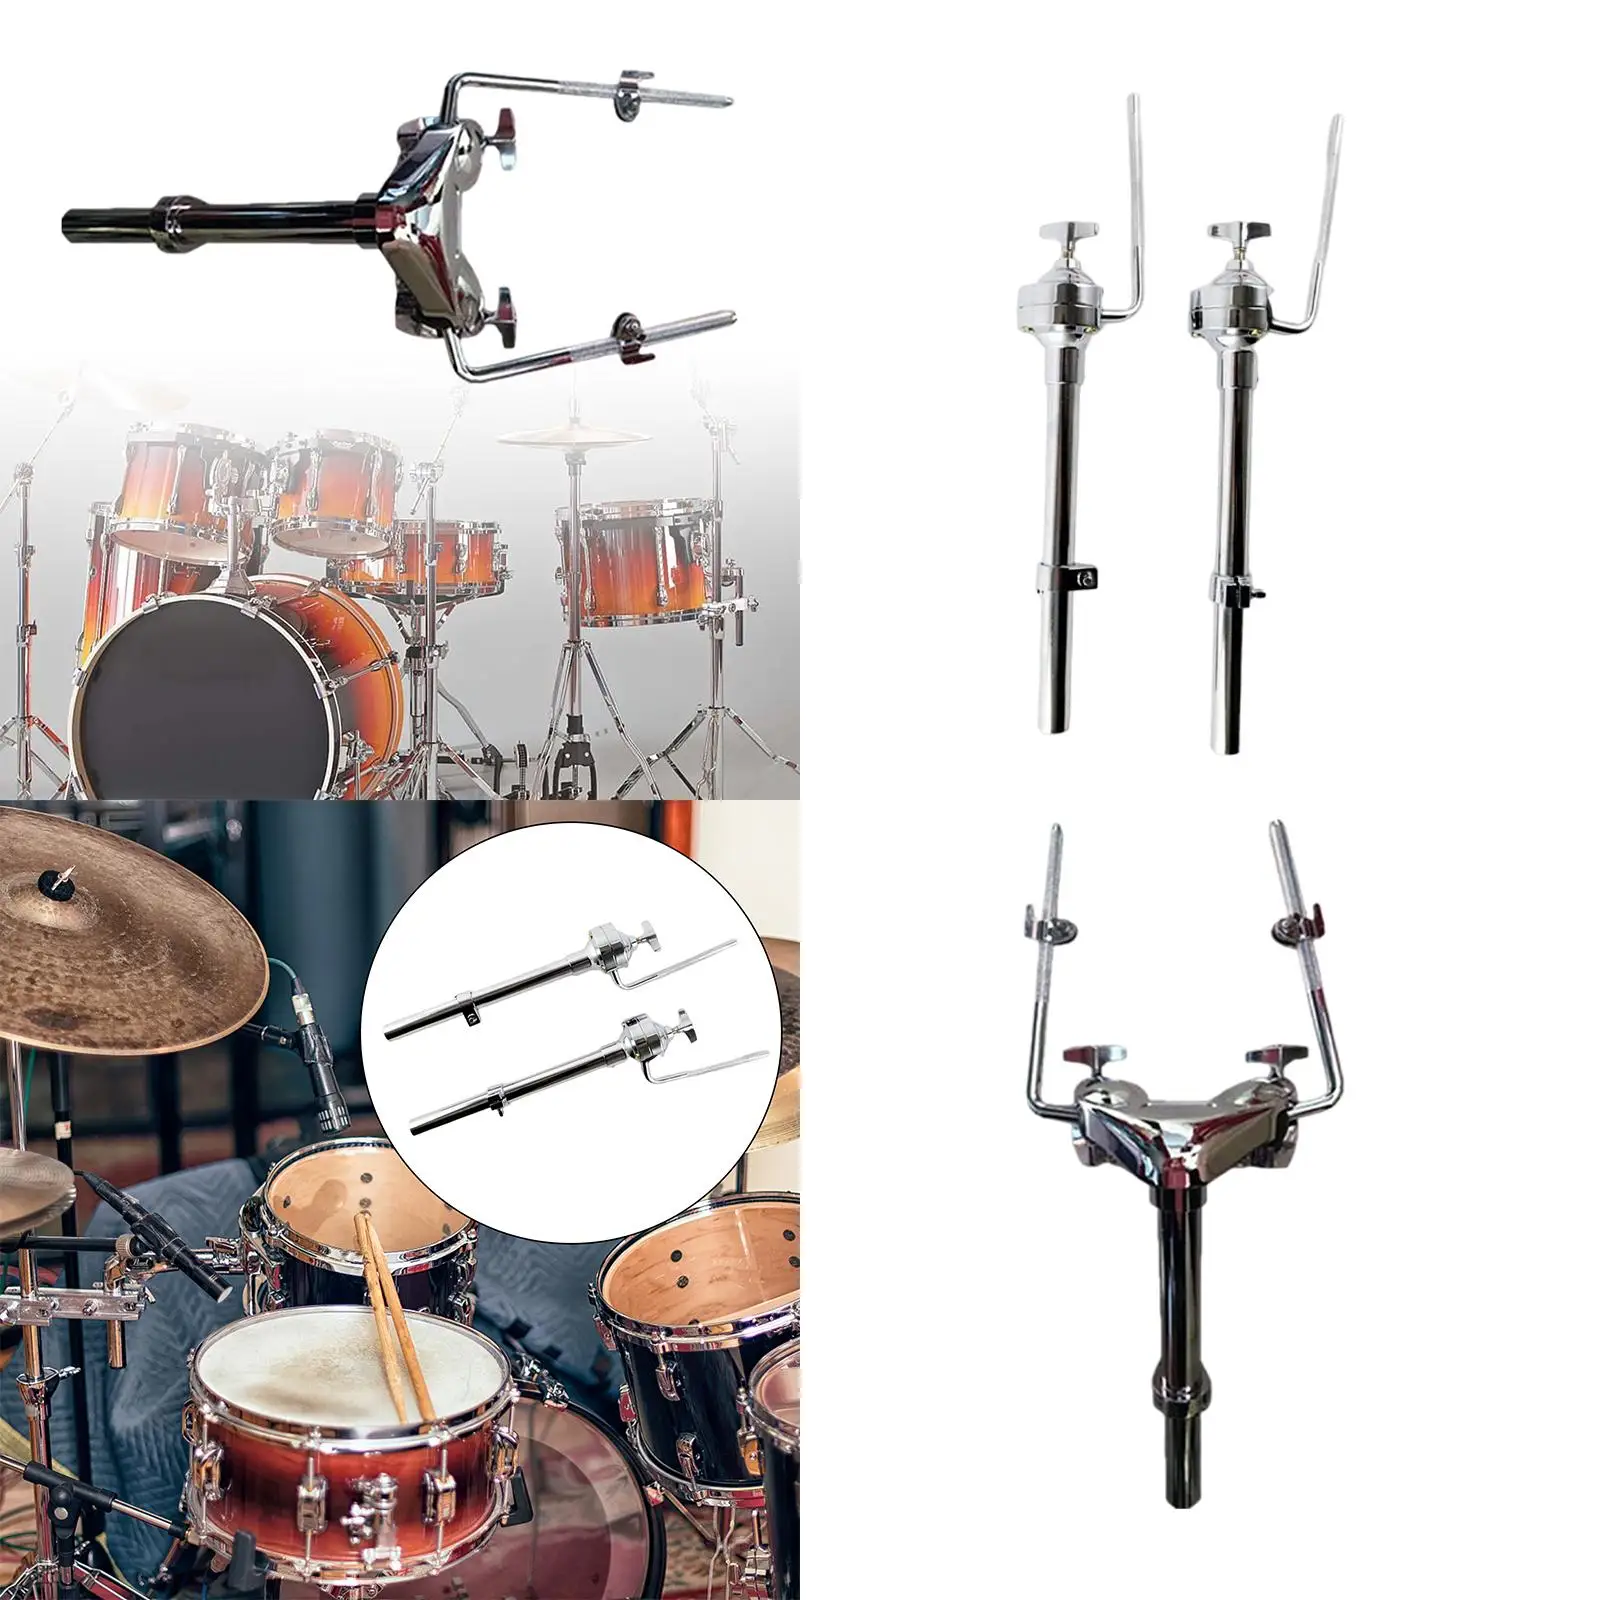 Metal Drum Holder Strong Durable Hardware Mount Sturdy Lightweight Stable for Tom Drum Instrument Percussion Accessory Replaces